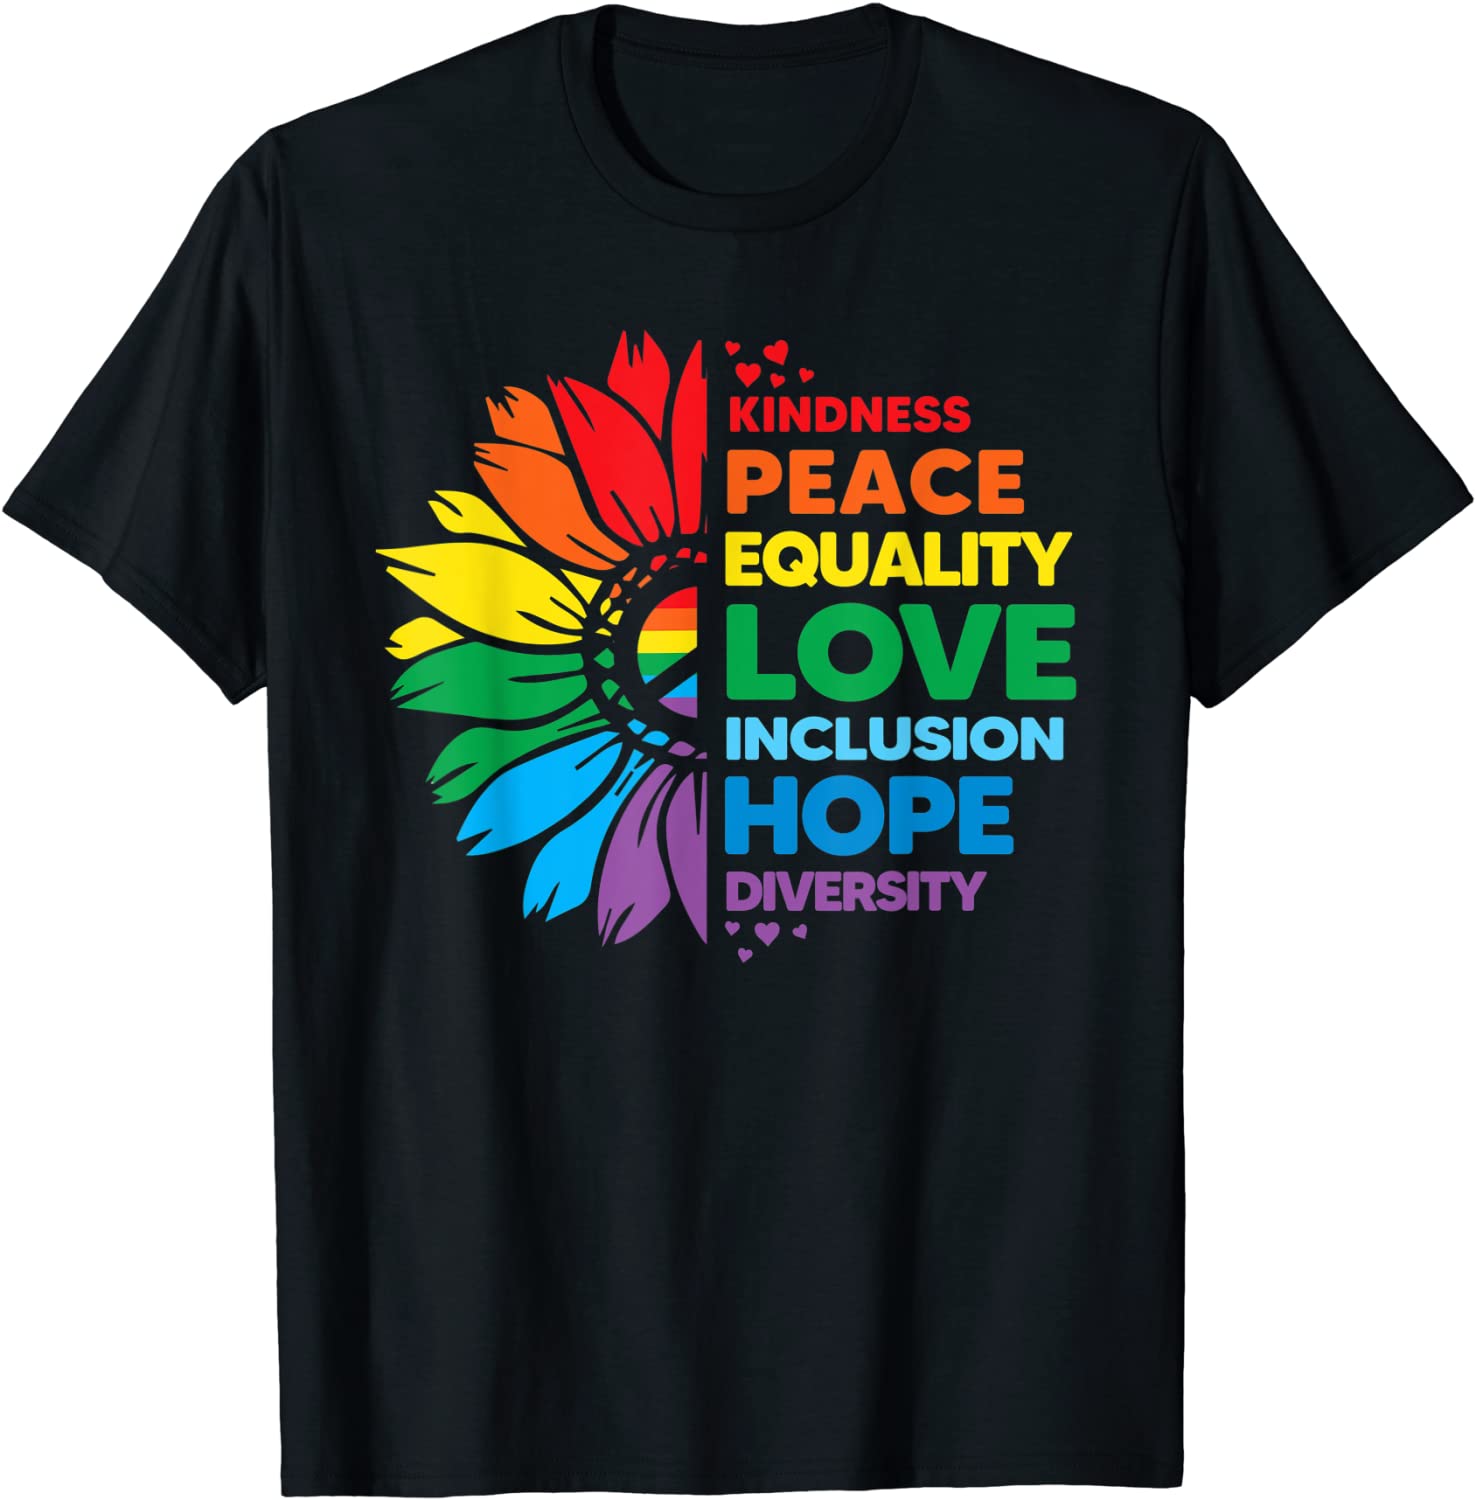 Kindness Peace Equality Love Inclusion Hope Diversity flower 2022 Shirt ...